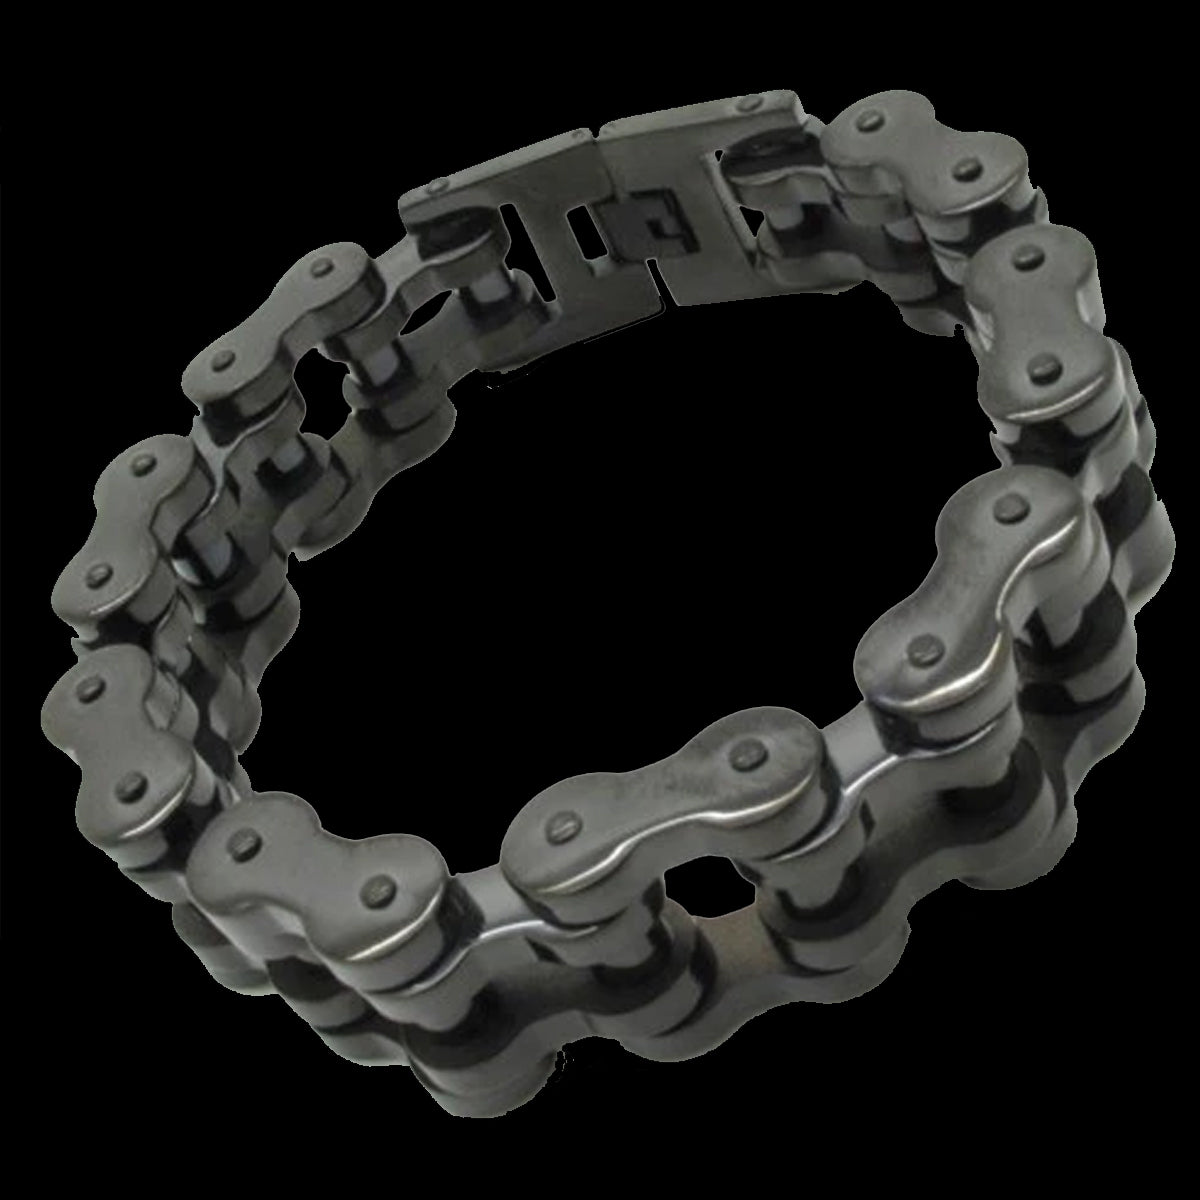 Black Motorcycle Chain | Motorcycle Chains | Best Motorcycle Chains